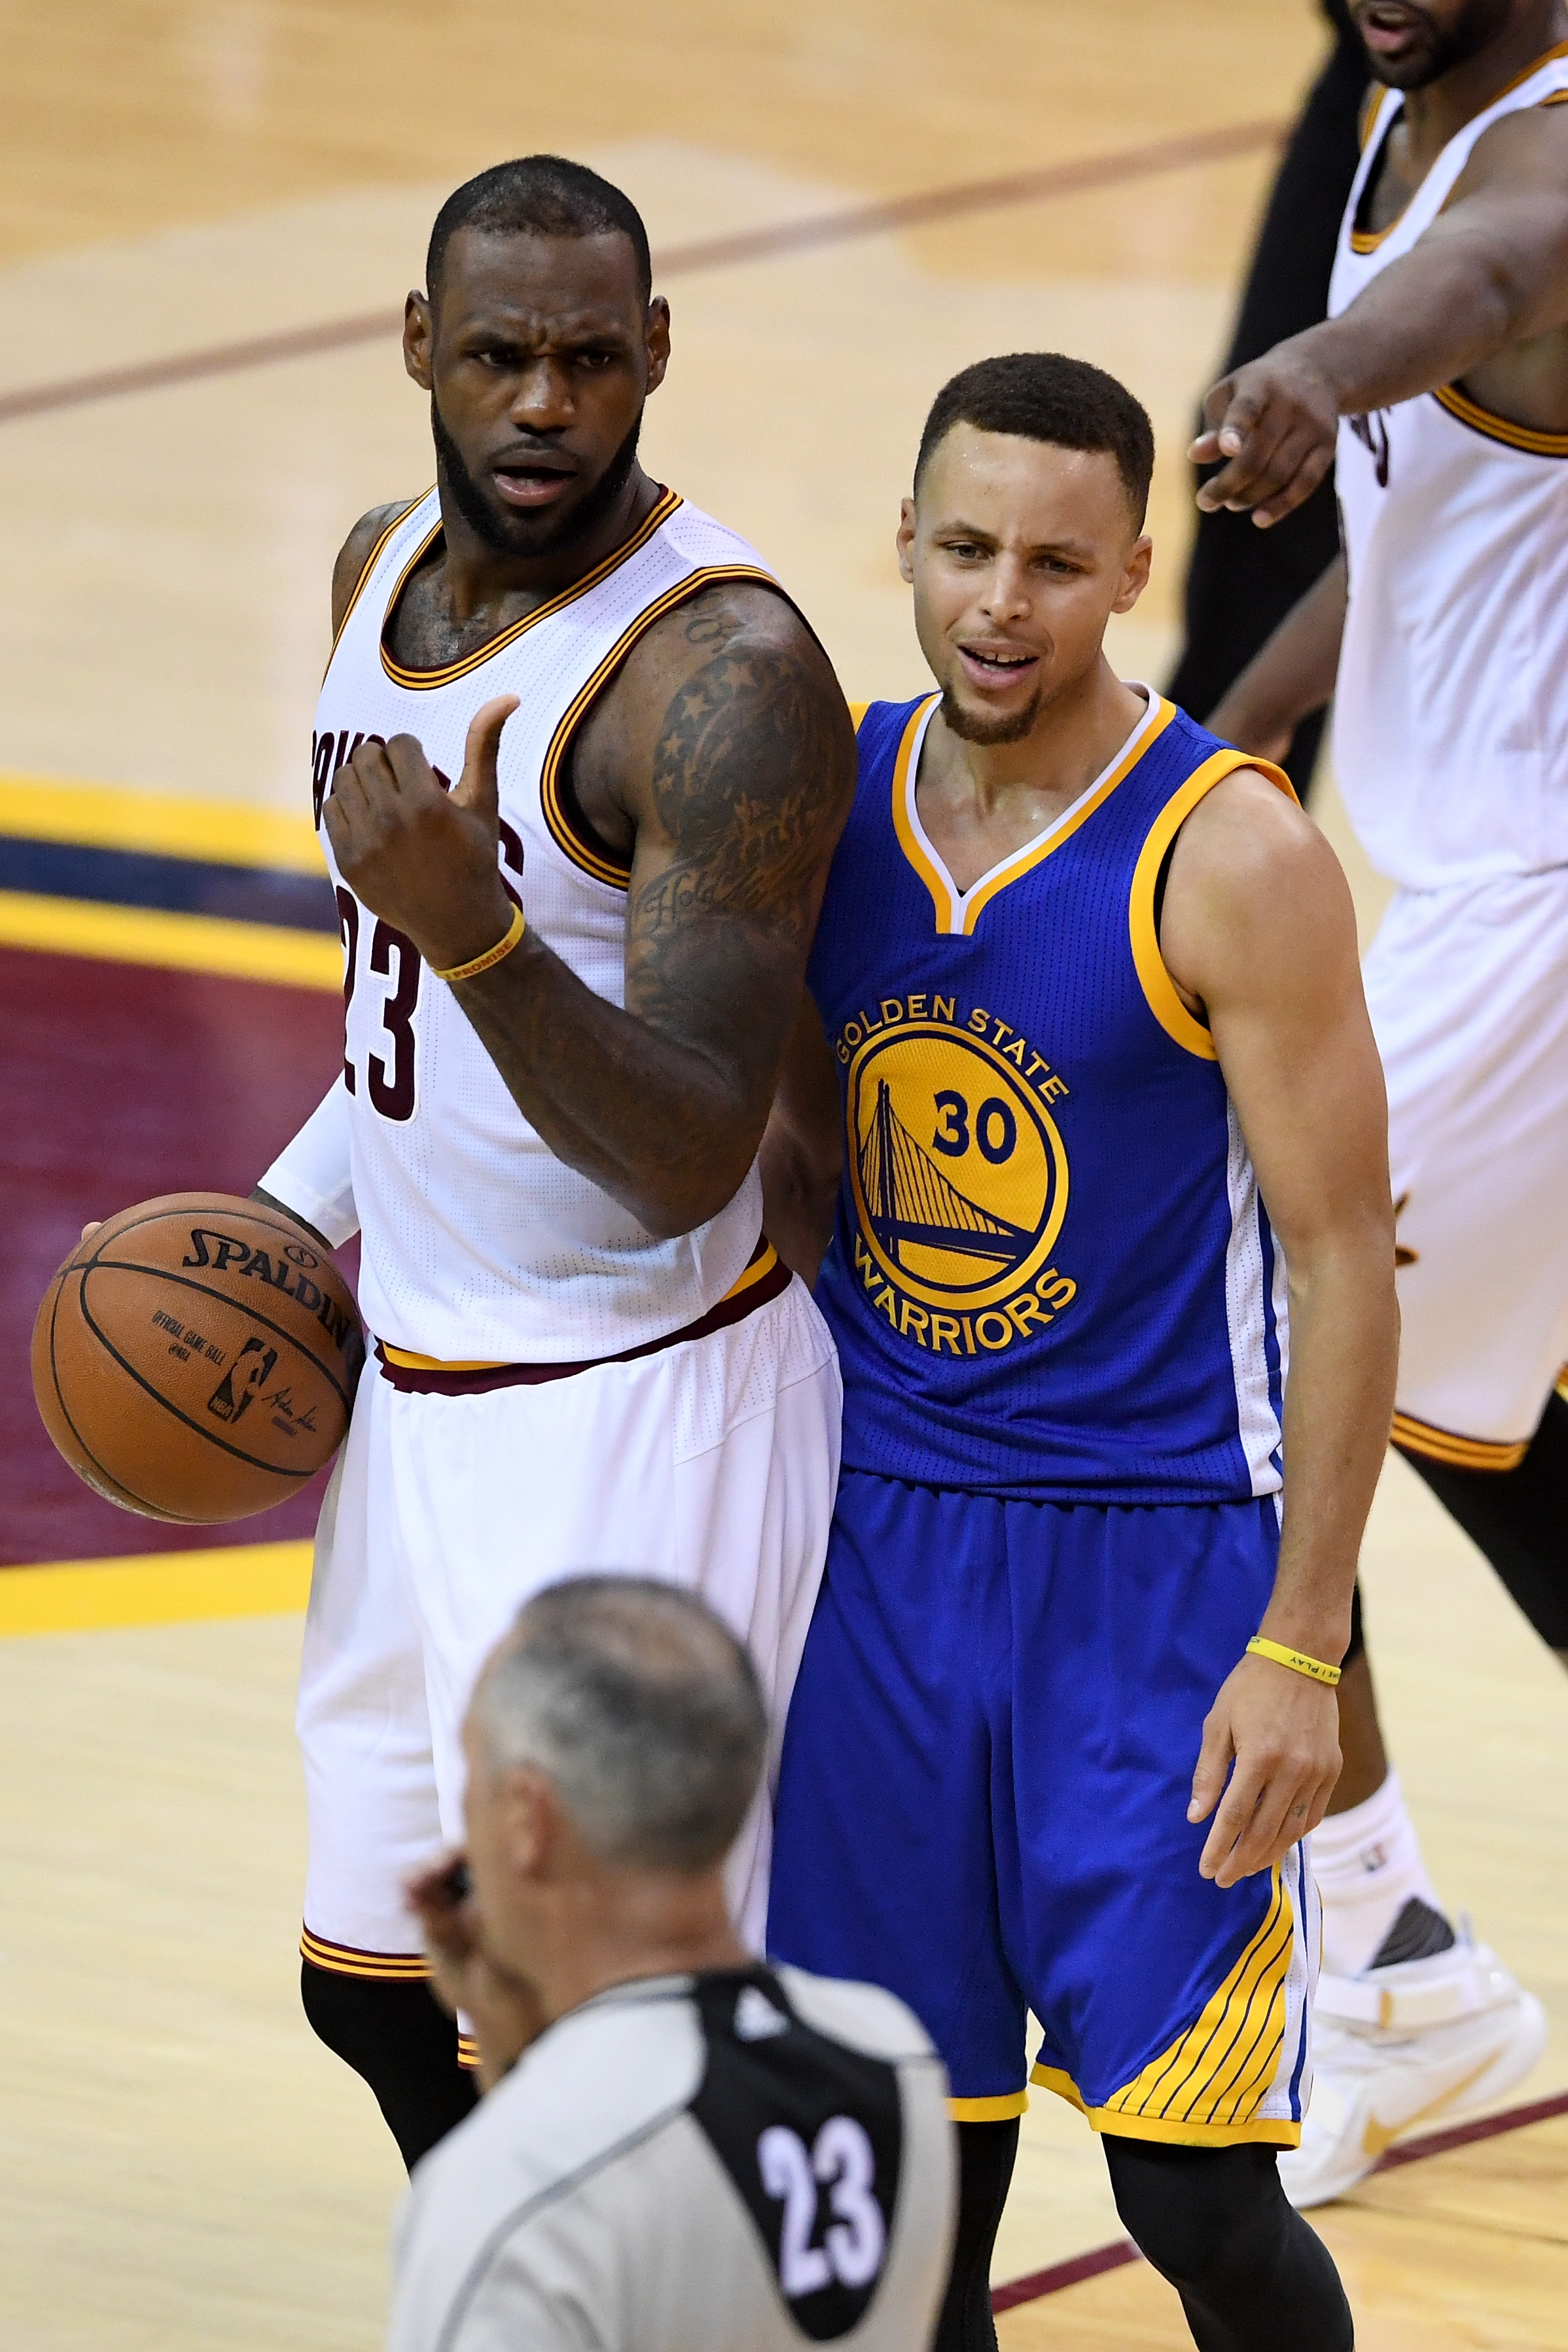 CLEVELAND, OH - JUNE 16: Stephen Curry #30 of the Golden State Warriors reacts to a foul call during the fourth quarter as LeBron James #23 of the Cleveland Cavaliers looks on in Game 6 of the 2016 NBA Finals at Quicken Loans Arena on June 16, 2016 in Cleveland, Ohio. NOTE TO USER: User expressly acknowledges and agrees that, by downloading and or using this photograph, User is consenting to the terms and conditions of the Getty Images License Agreement.   Jason Miller/Getty Images/AFP